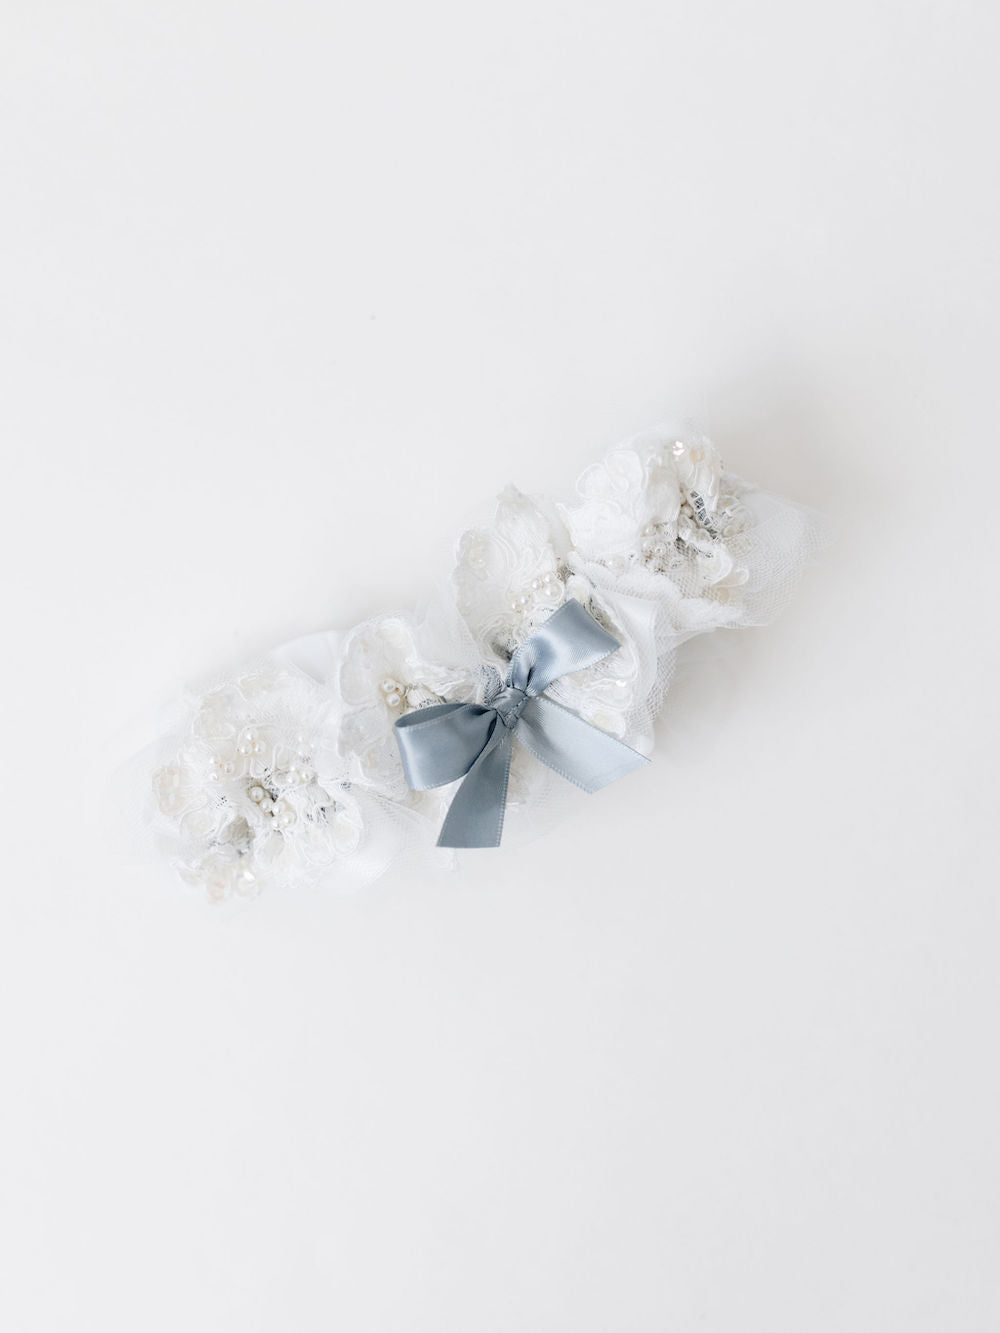 custom wedding garter heirloom with dusty blue ribbon with pearls, tulle, and lace from mom's wedding dress handmade by The Garter Girl